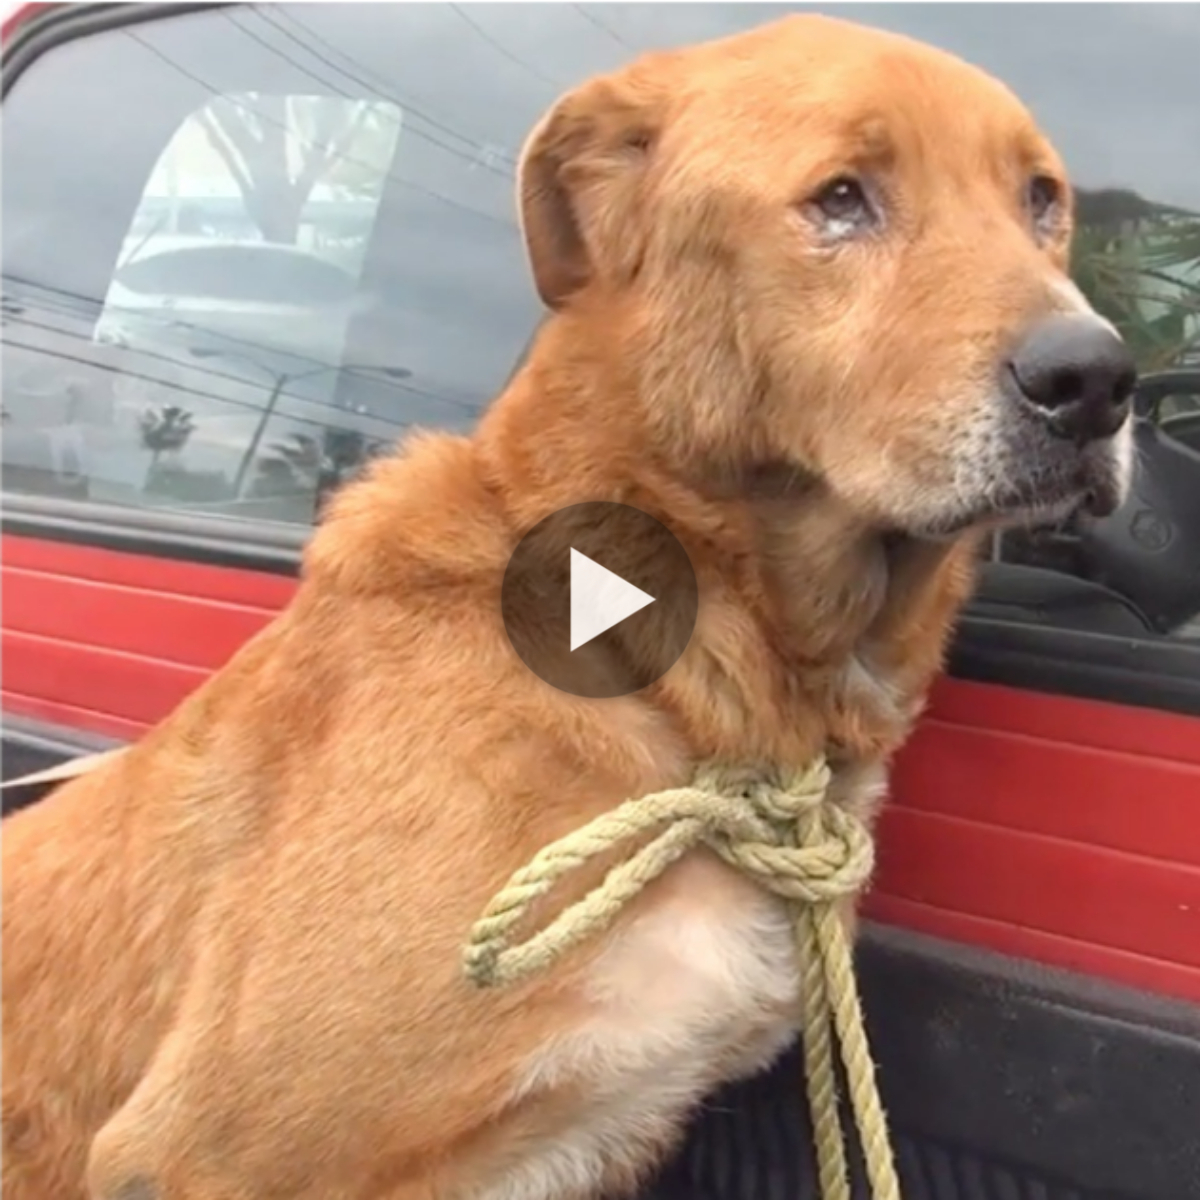 The elderly dog was dejected and unhappy that he was compelled to scavenge on the streets for a living and that no one helped him. (Video)